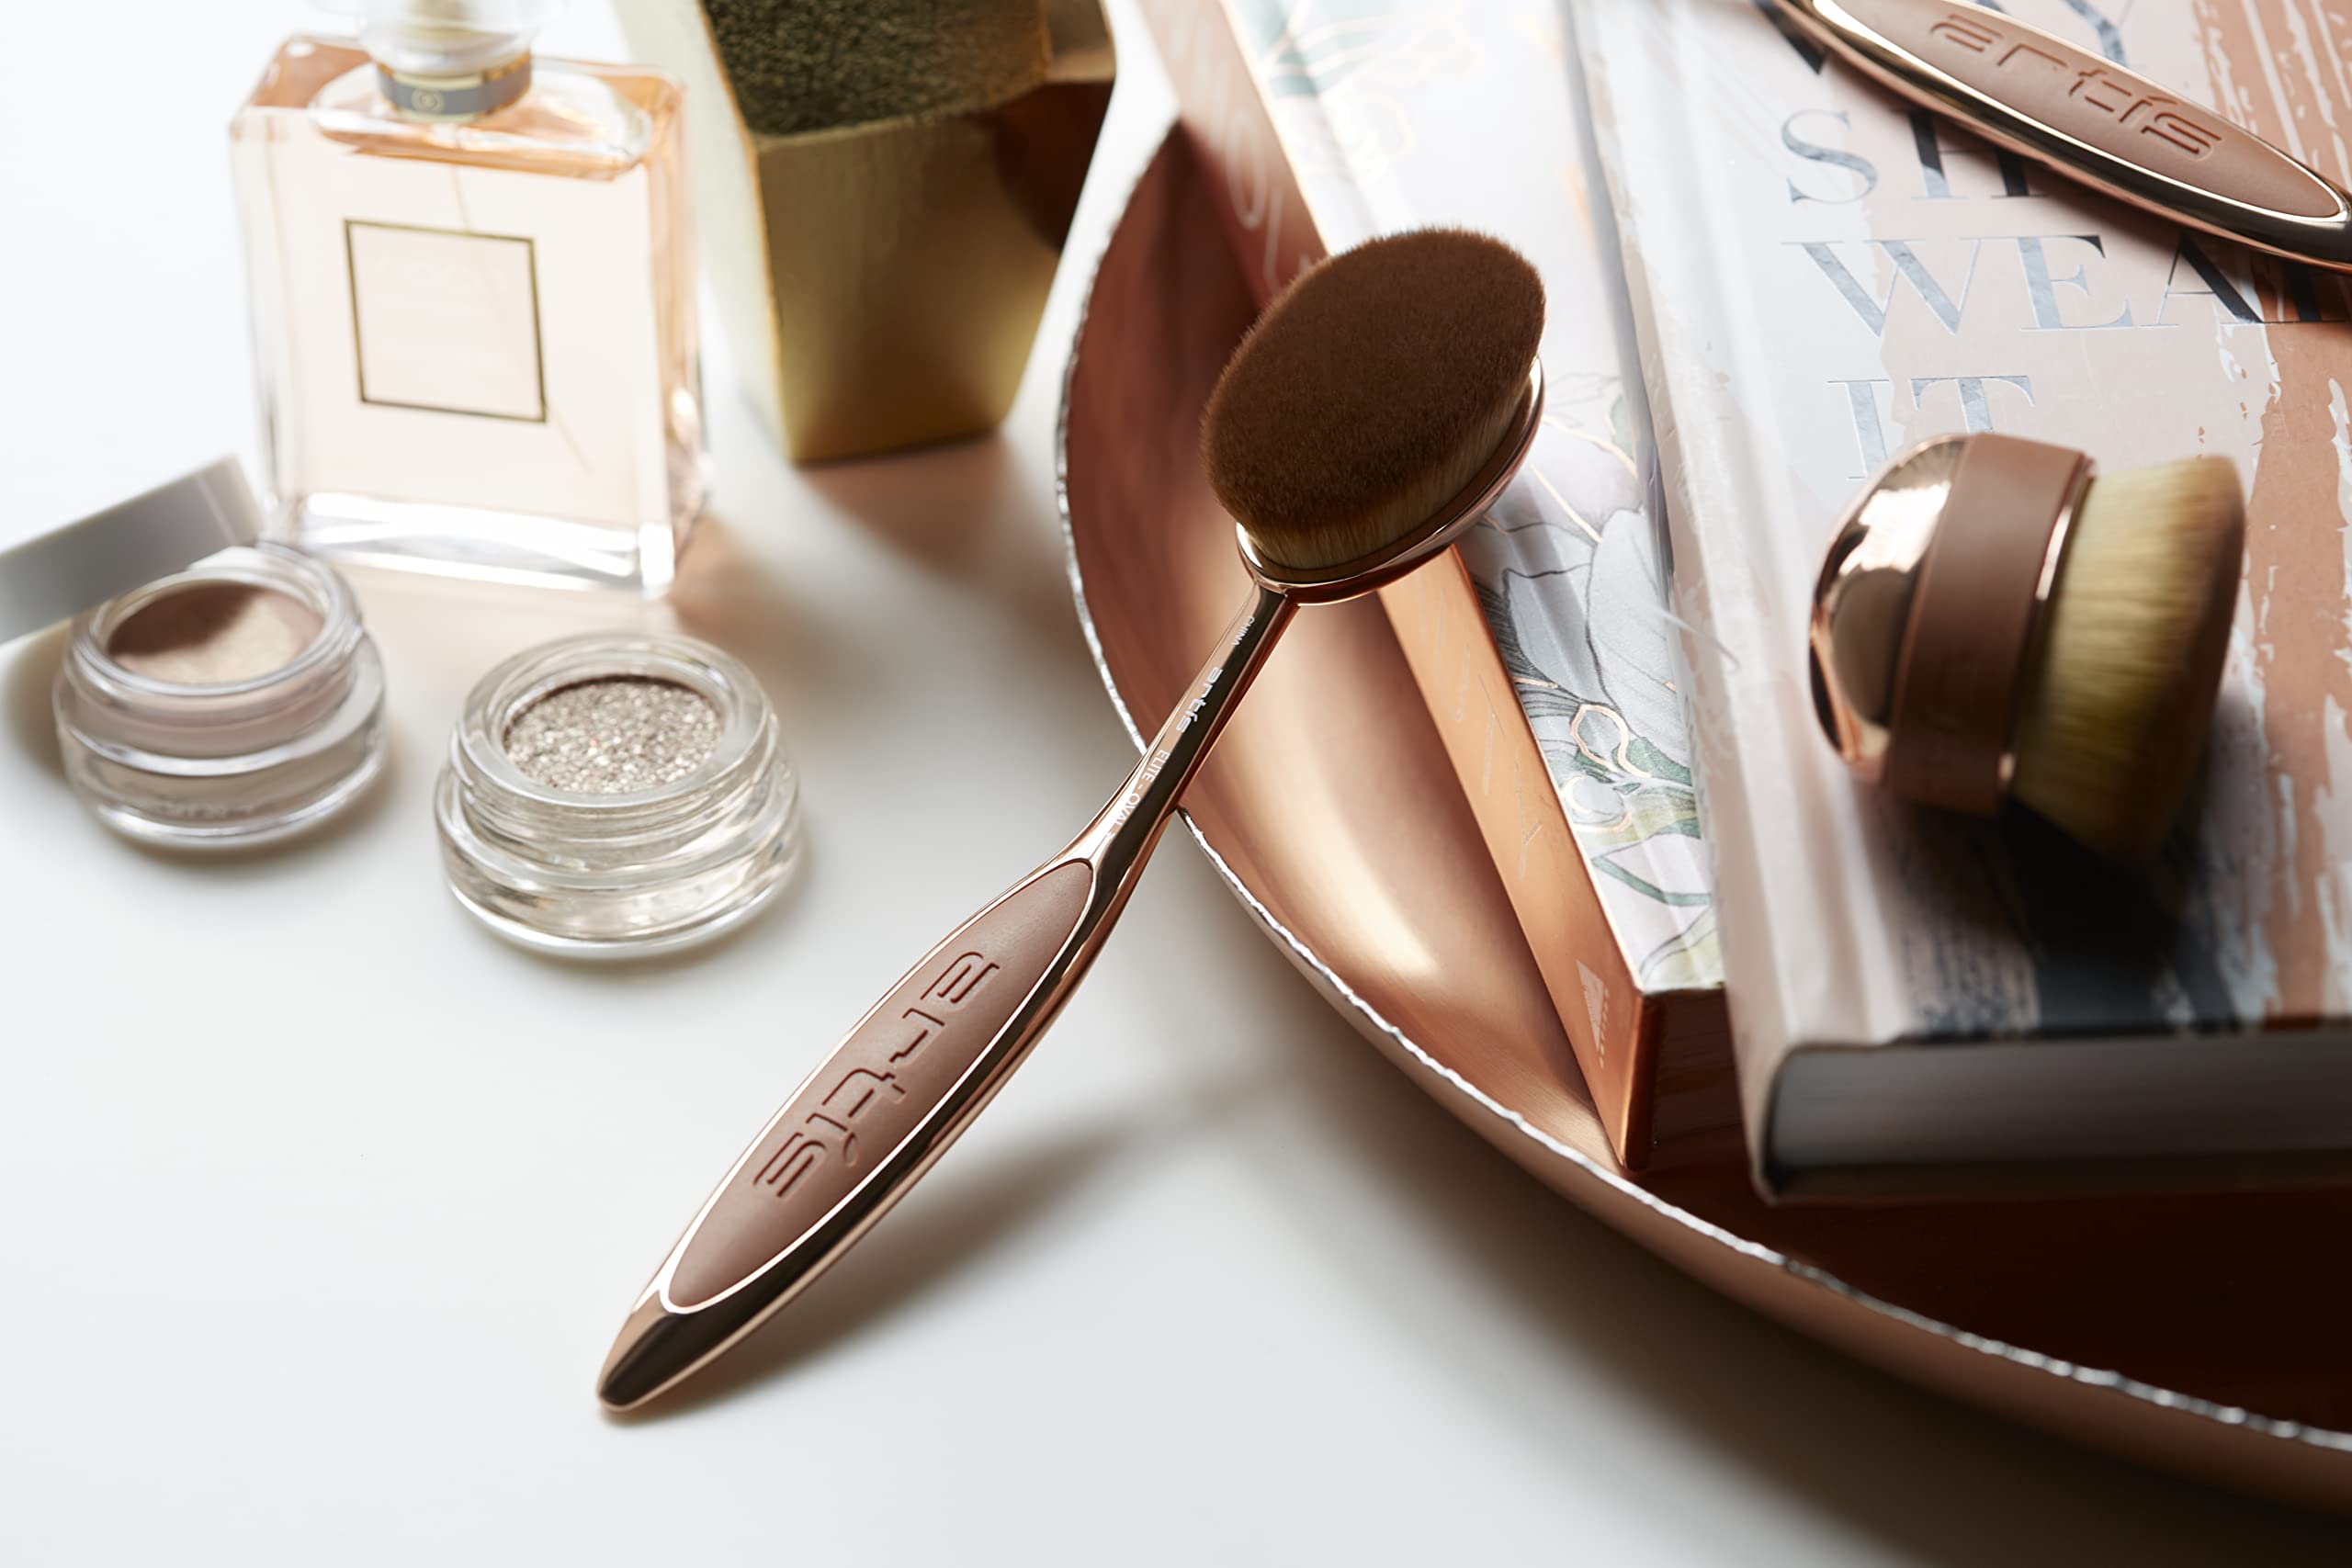 Artis Elite Palm Makeup Brush Luxury Synthetic Cosmefibre Brush Ideal For Foundation, SPF, Skincare Use With Liquids, Powders, and Creams Creates A Streak-Free Application